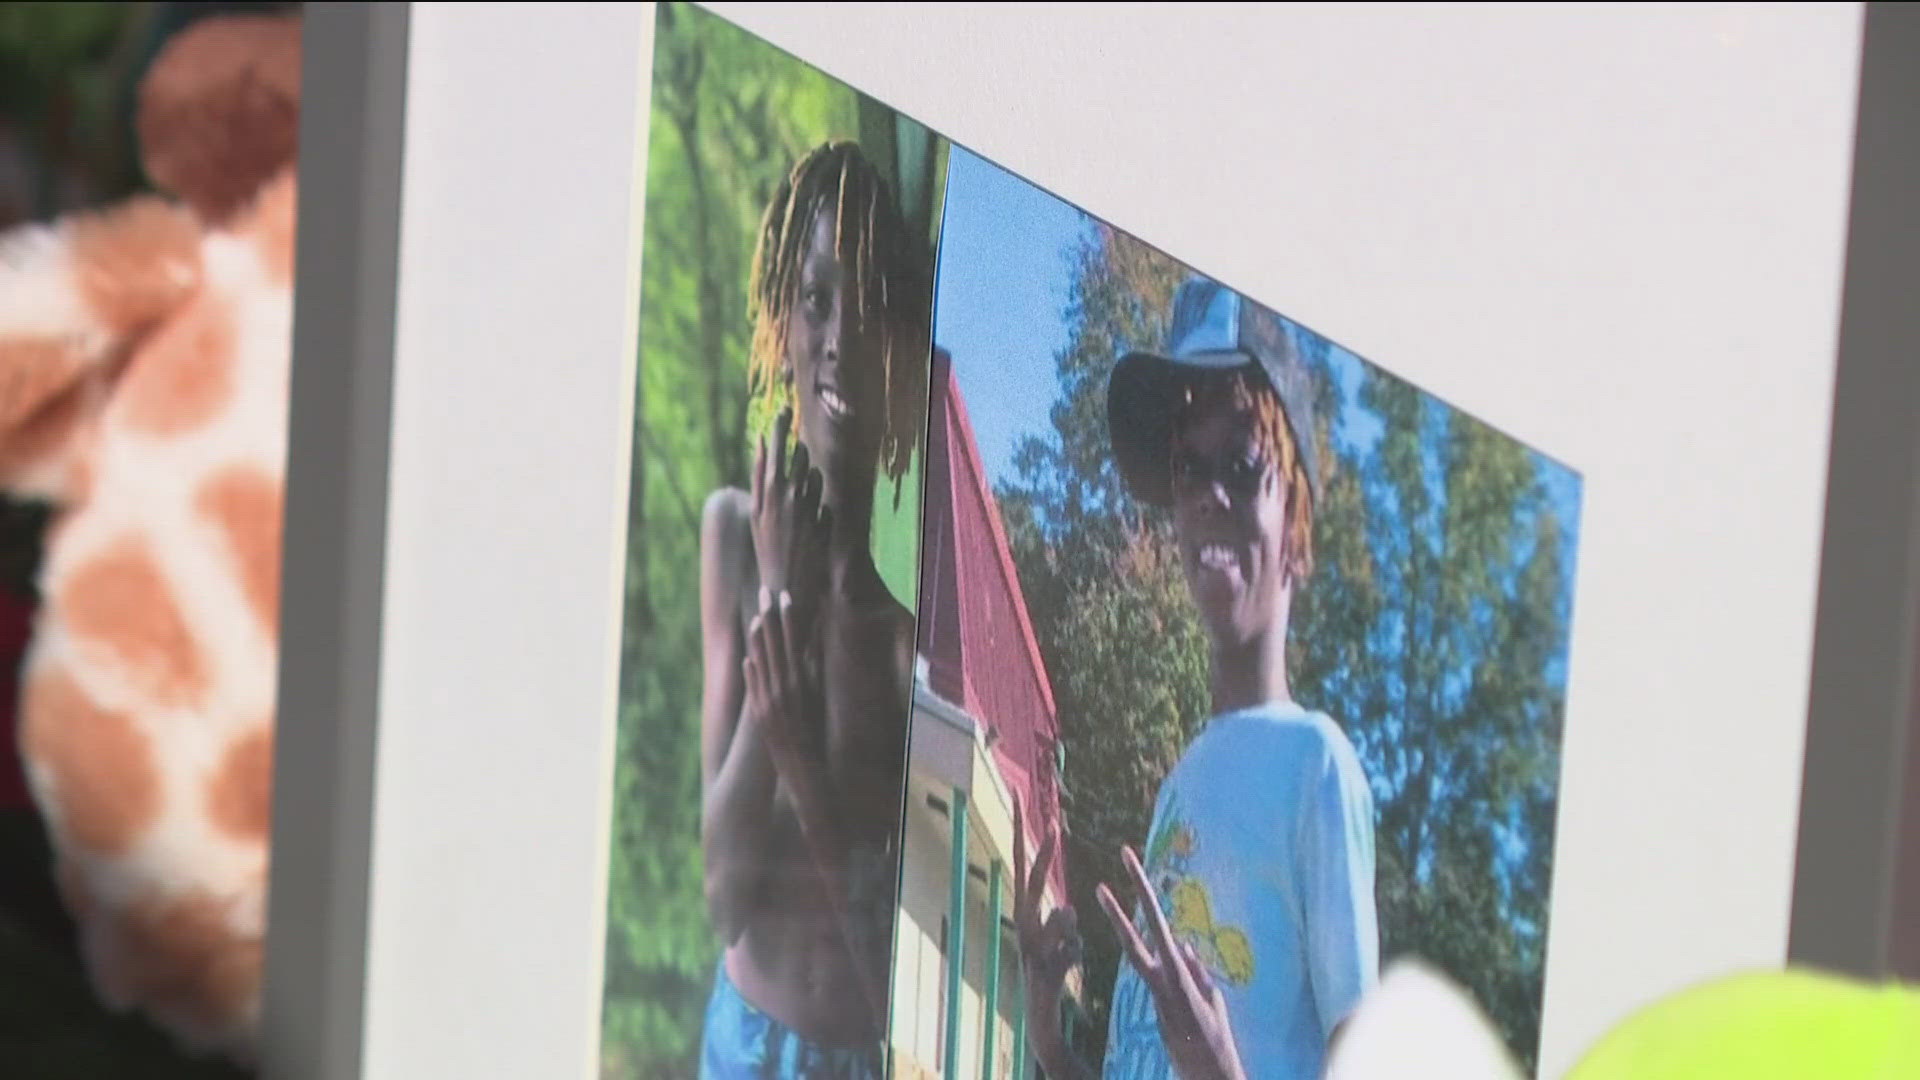 Police identified the victims as best friends JaKody Davis and Lamon Freeman, both 13 years old.